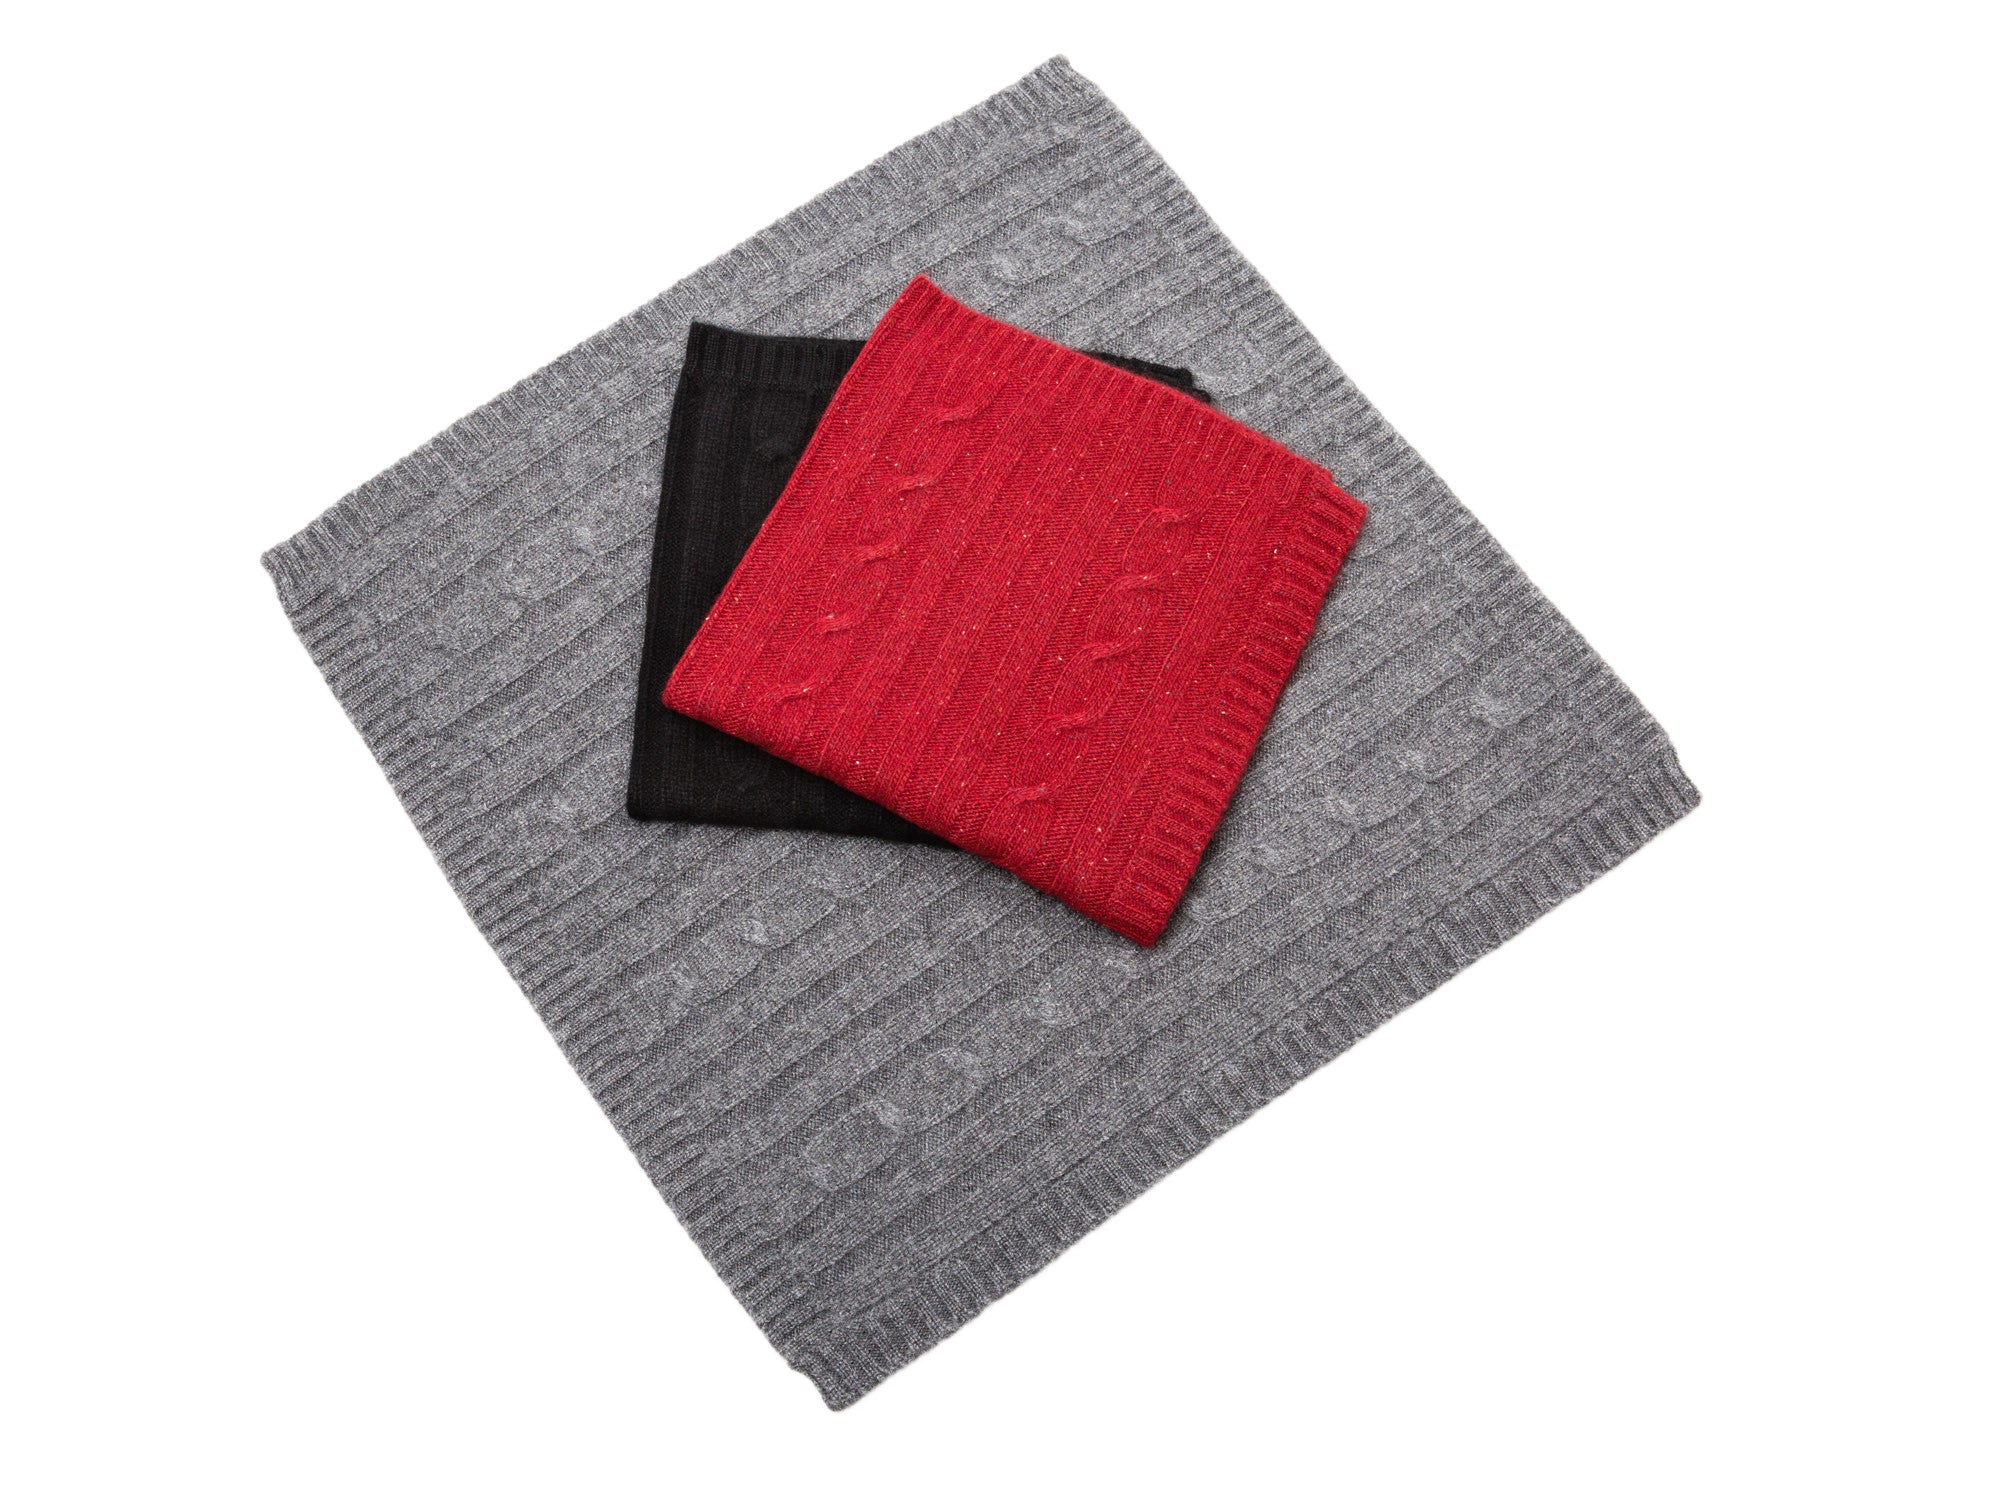 Cashmere Blanket - Gray, Black, or Burgundy - Canine Styles - 3 Color Options